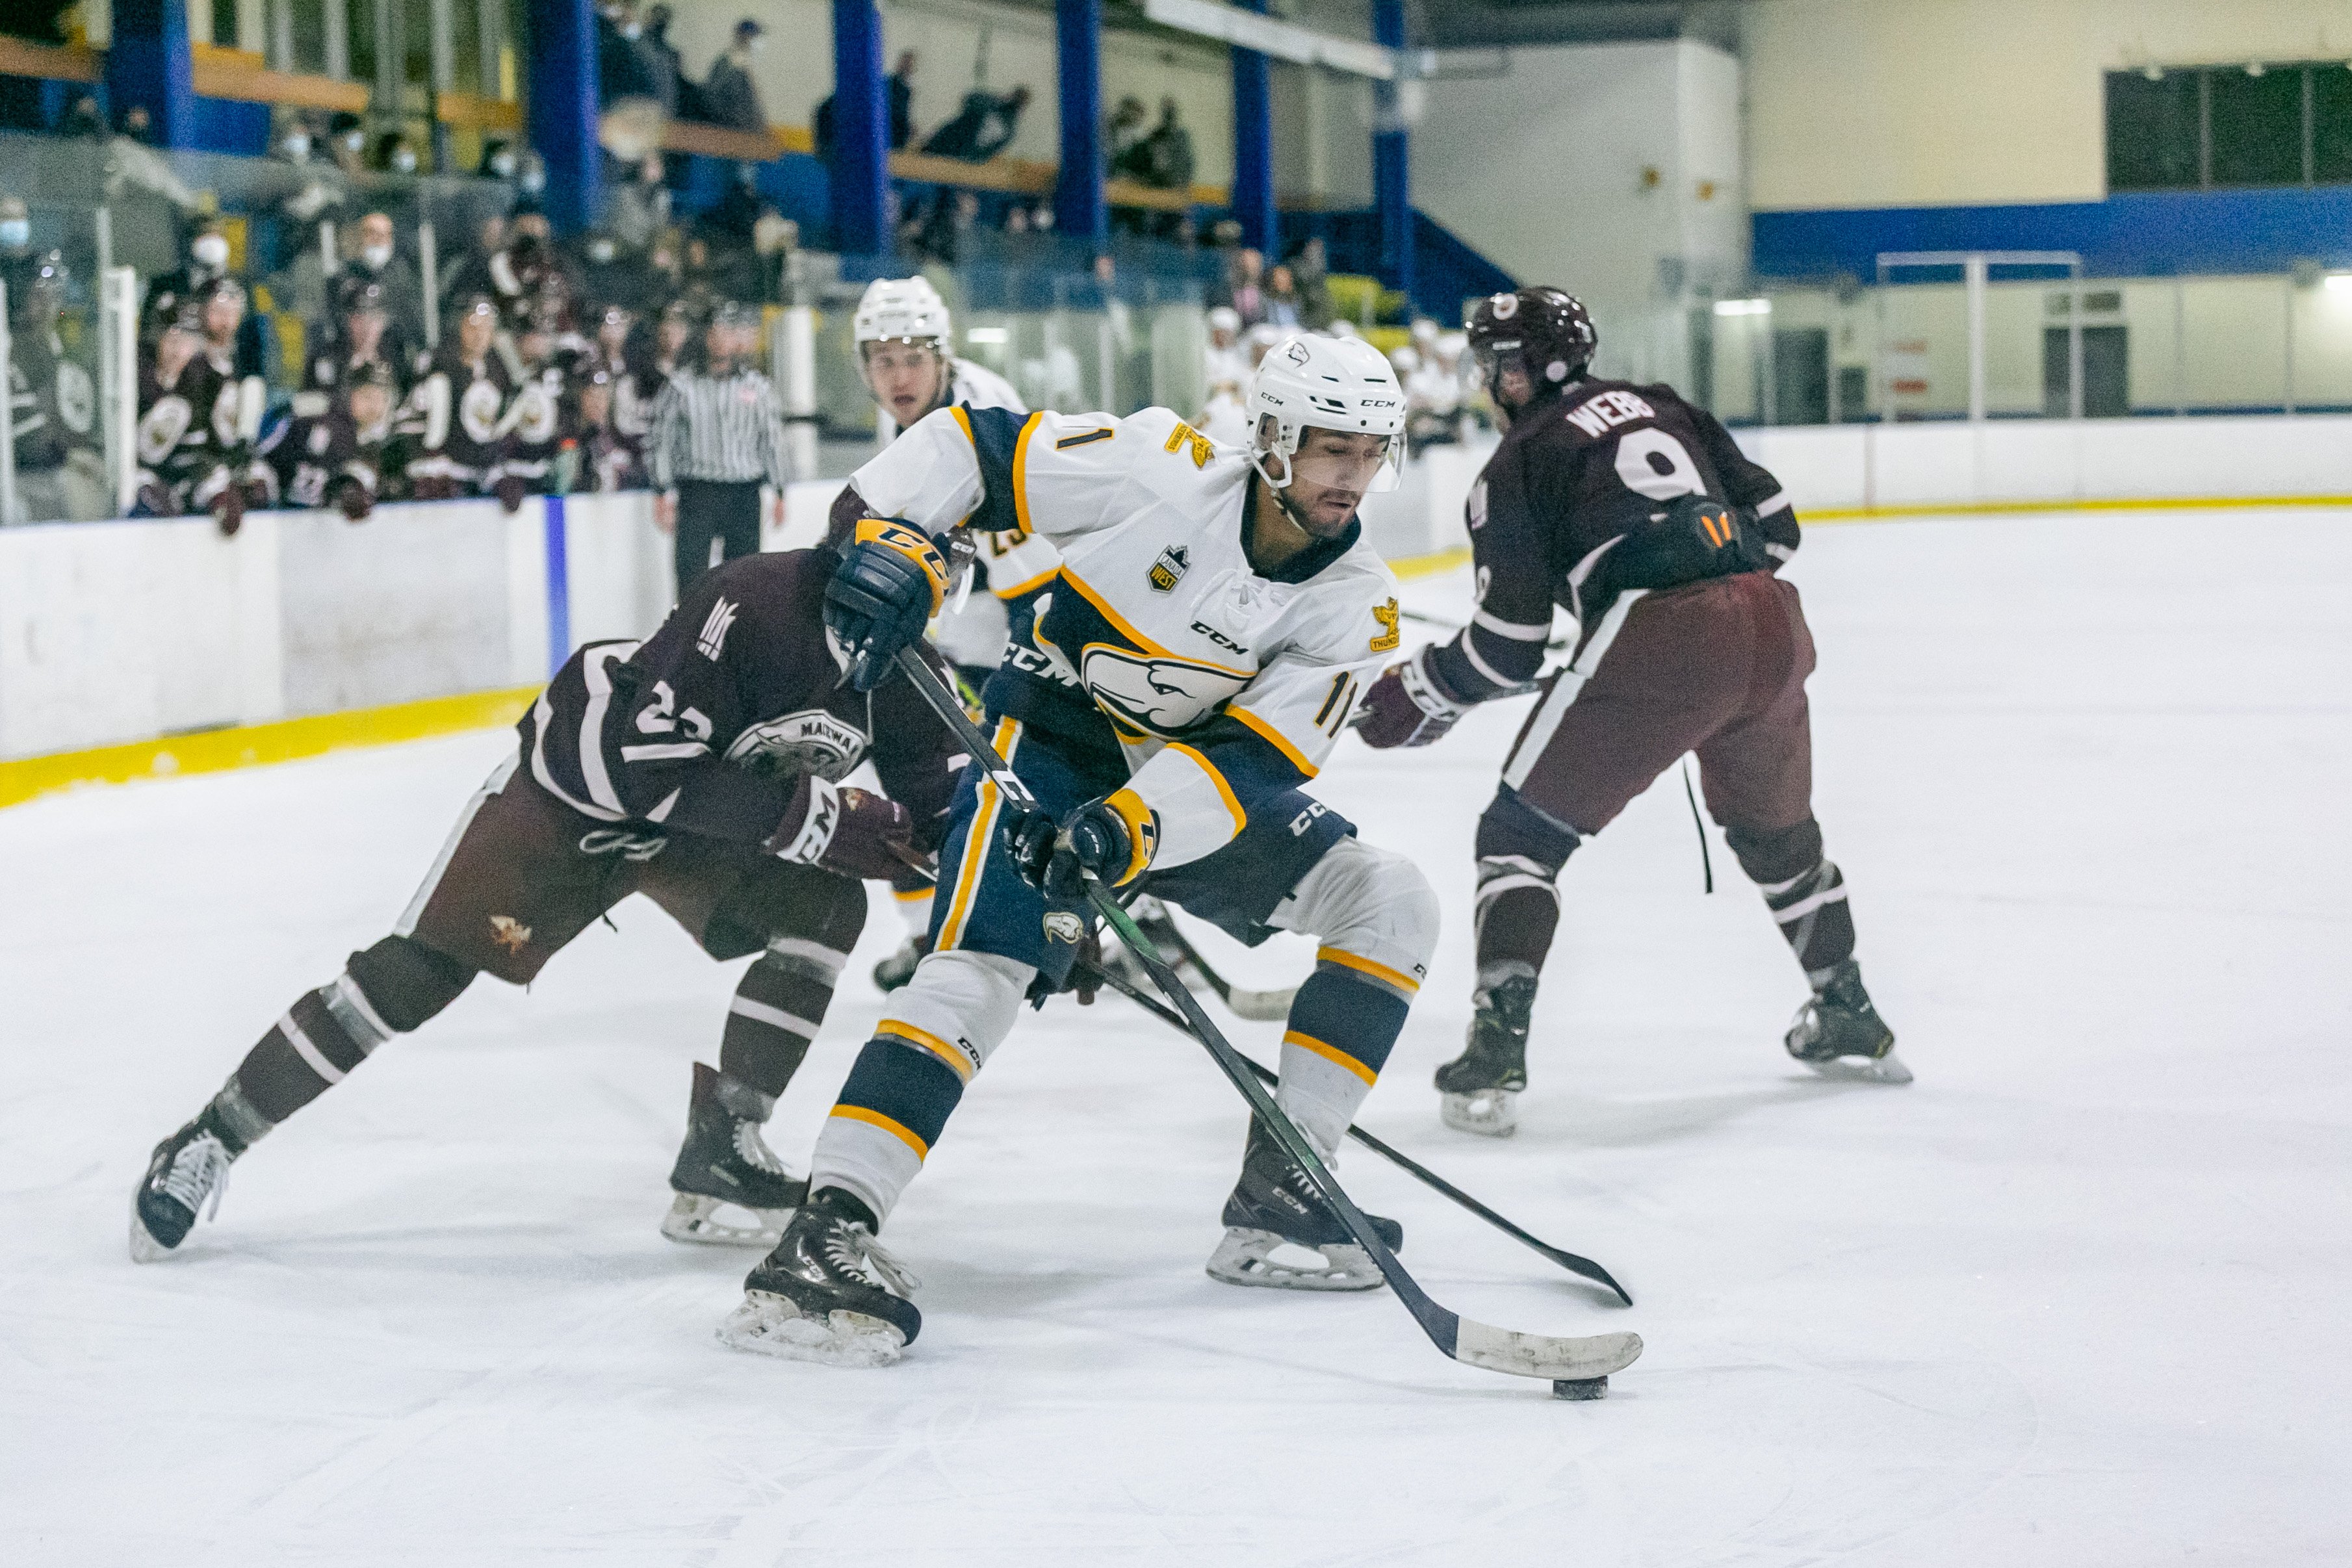 The T-Birds’ historic season is not yet finished, as the team will still partake in the U Sports men’s hockey championships beginning in just over a week’s time.